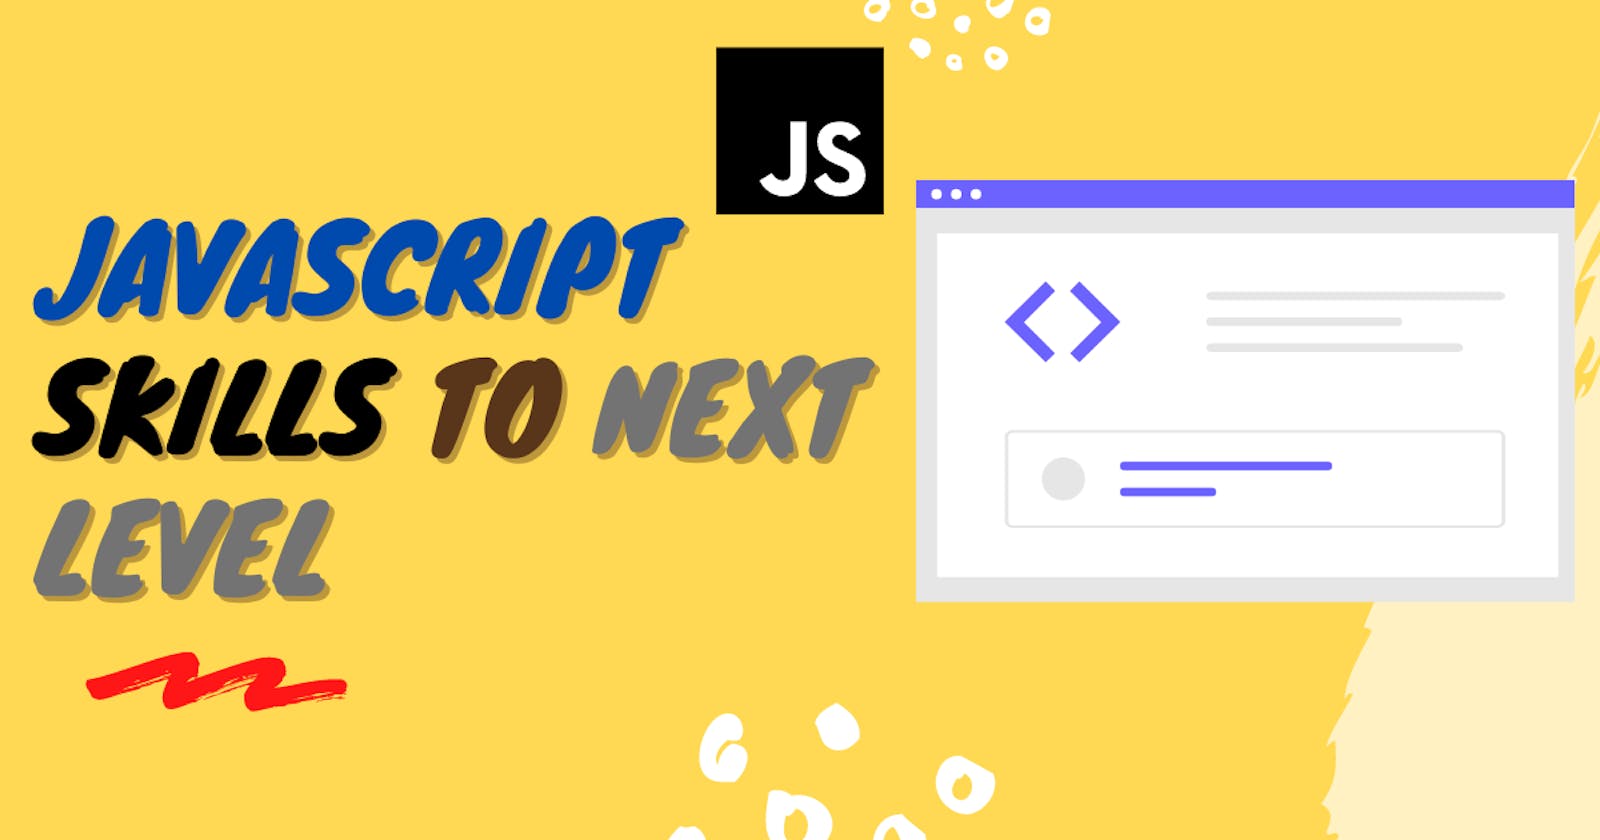 Concepts to make your JavaScript skills to next level